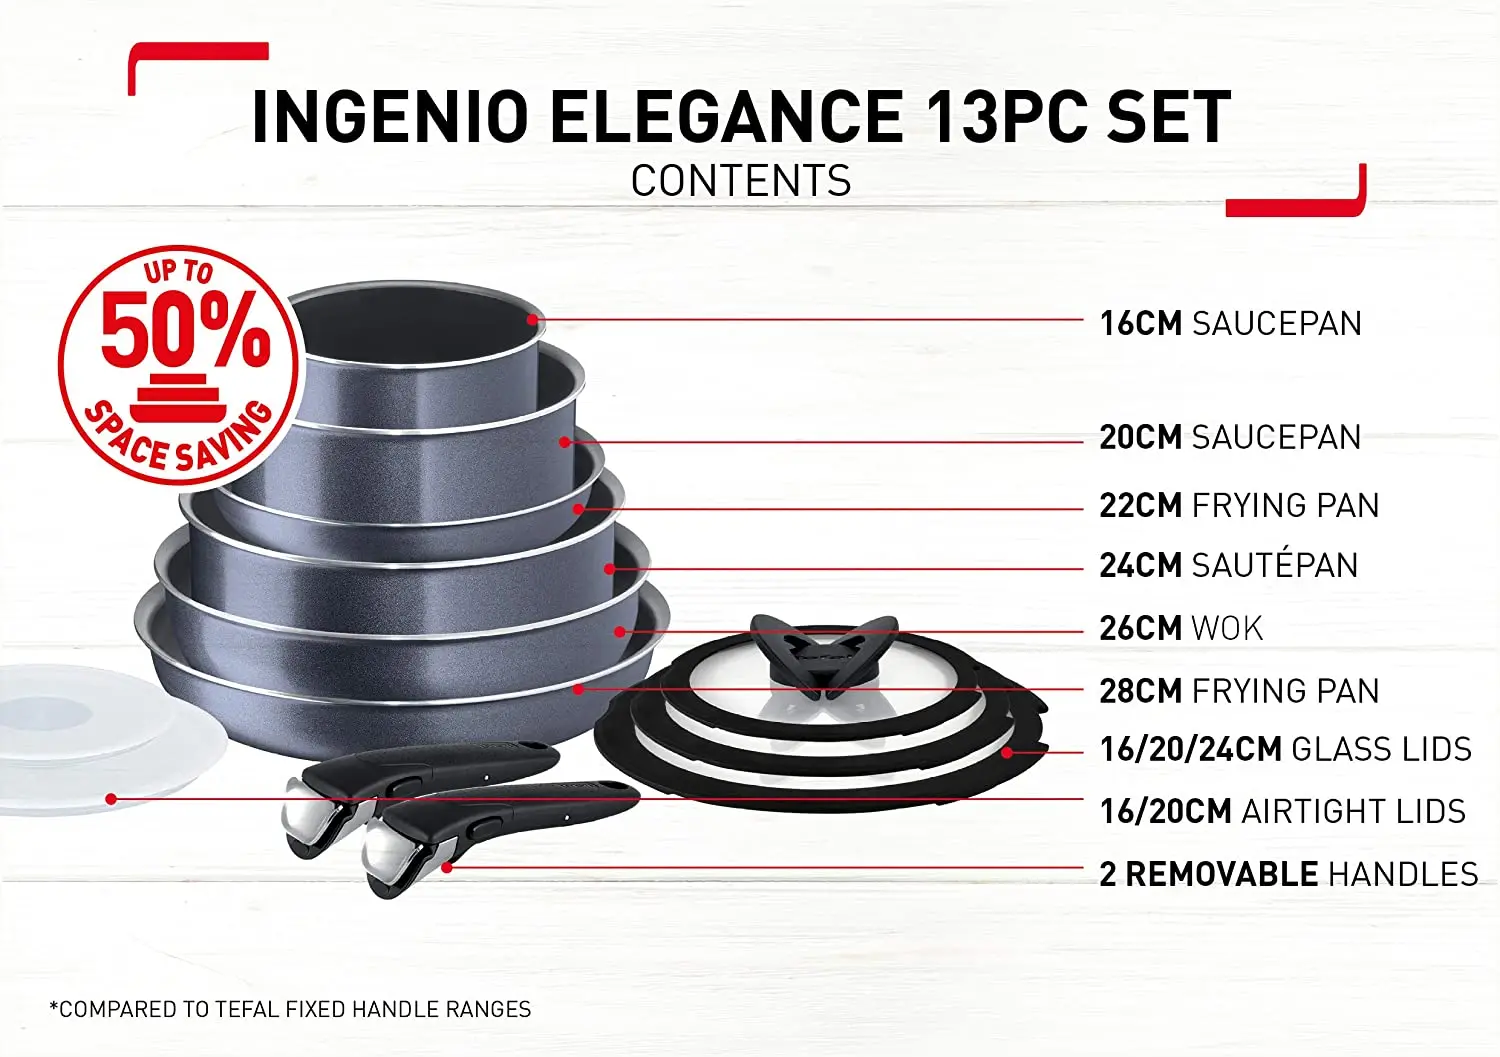 The most aesthetic cookware with detachable handles and airtight